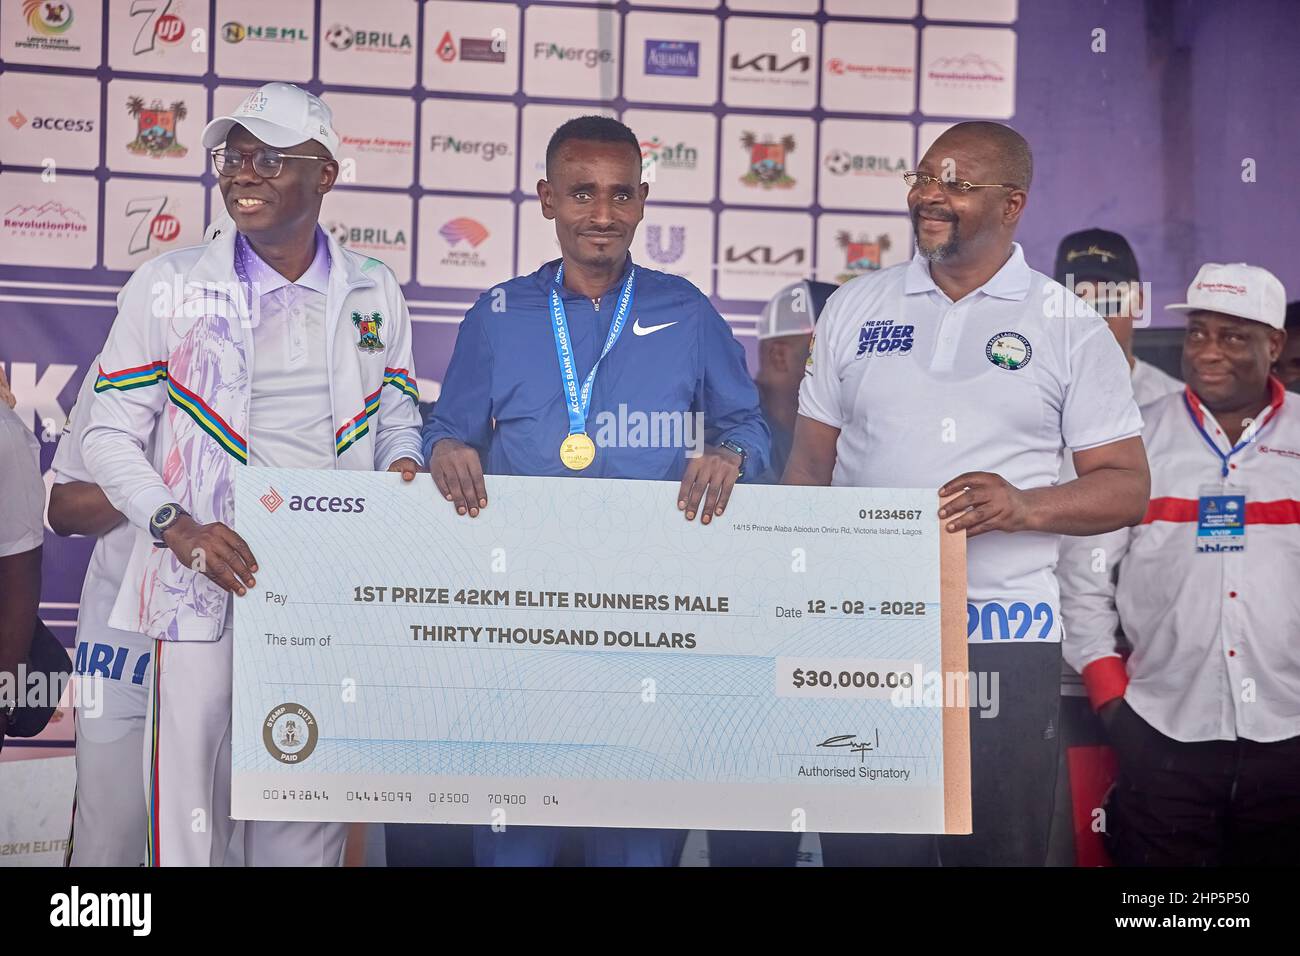 1st place marathon winner, Geleta Ulfata receives a medal and prize money after competing in the Access Bank Lagos City Marathon on February 12, 2022. Stock Photo